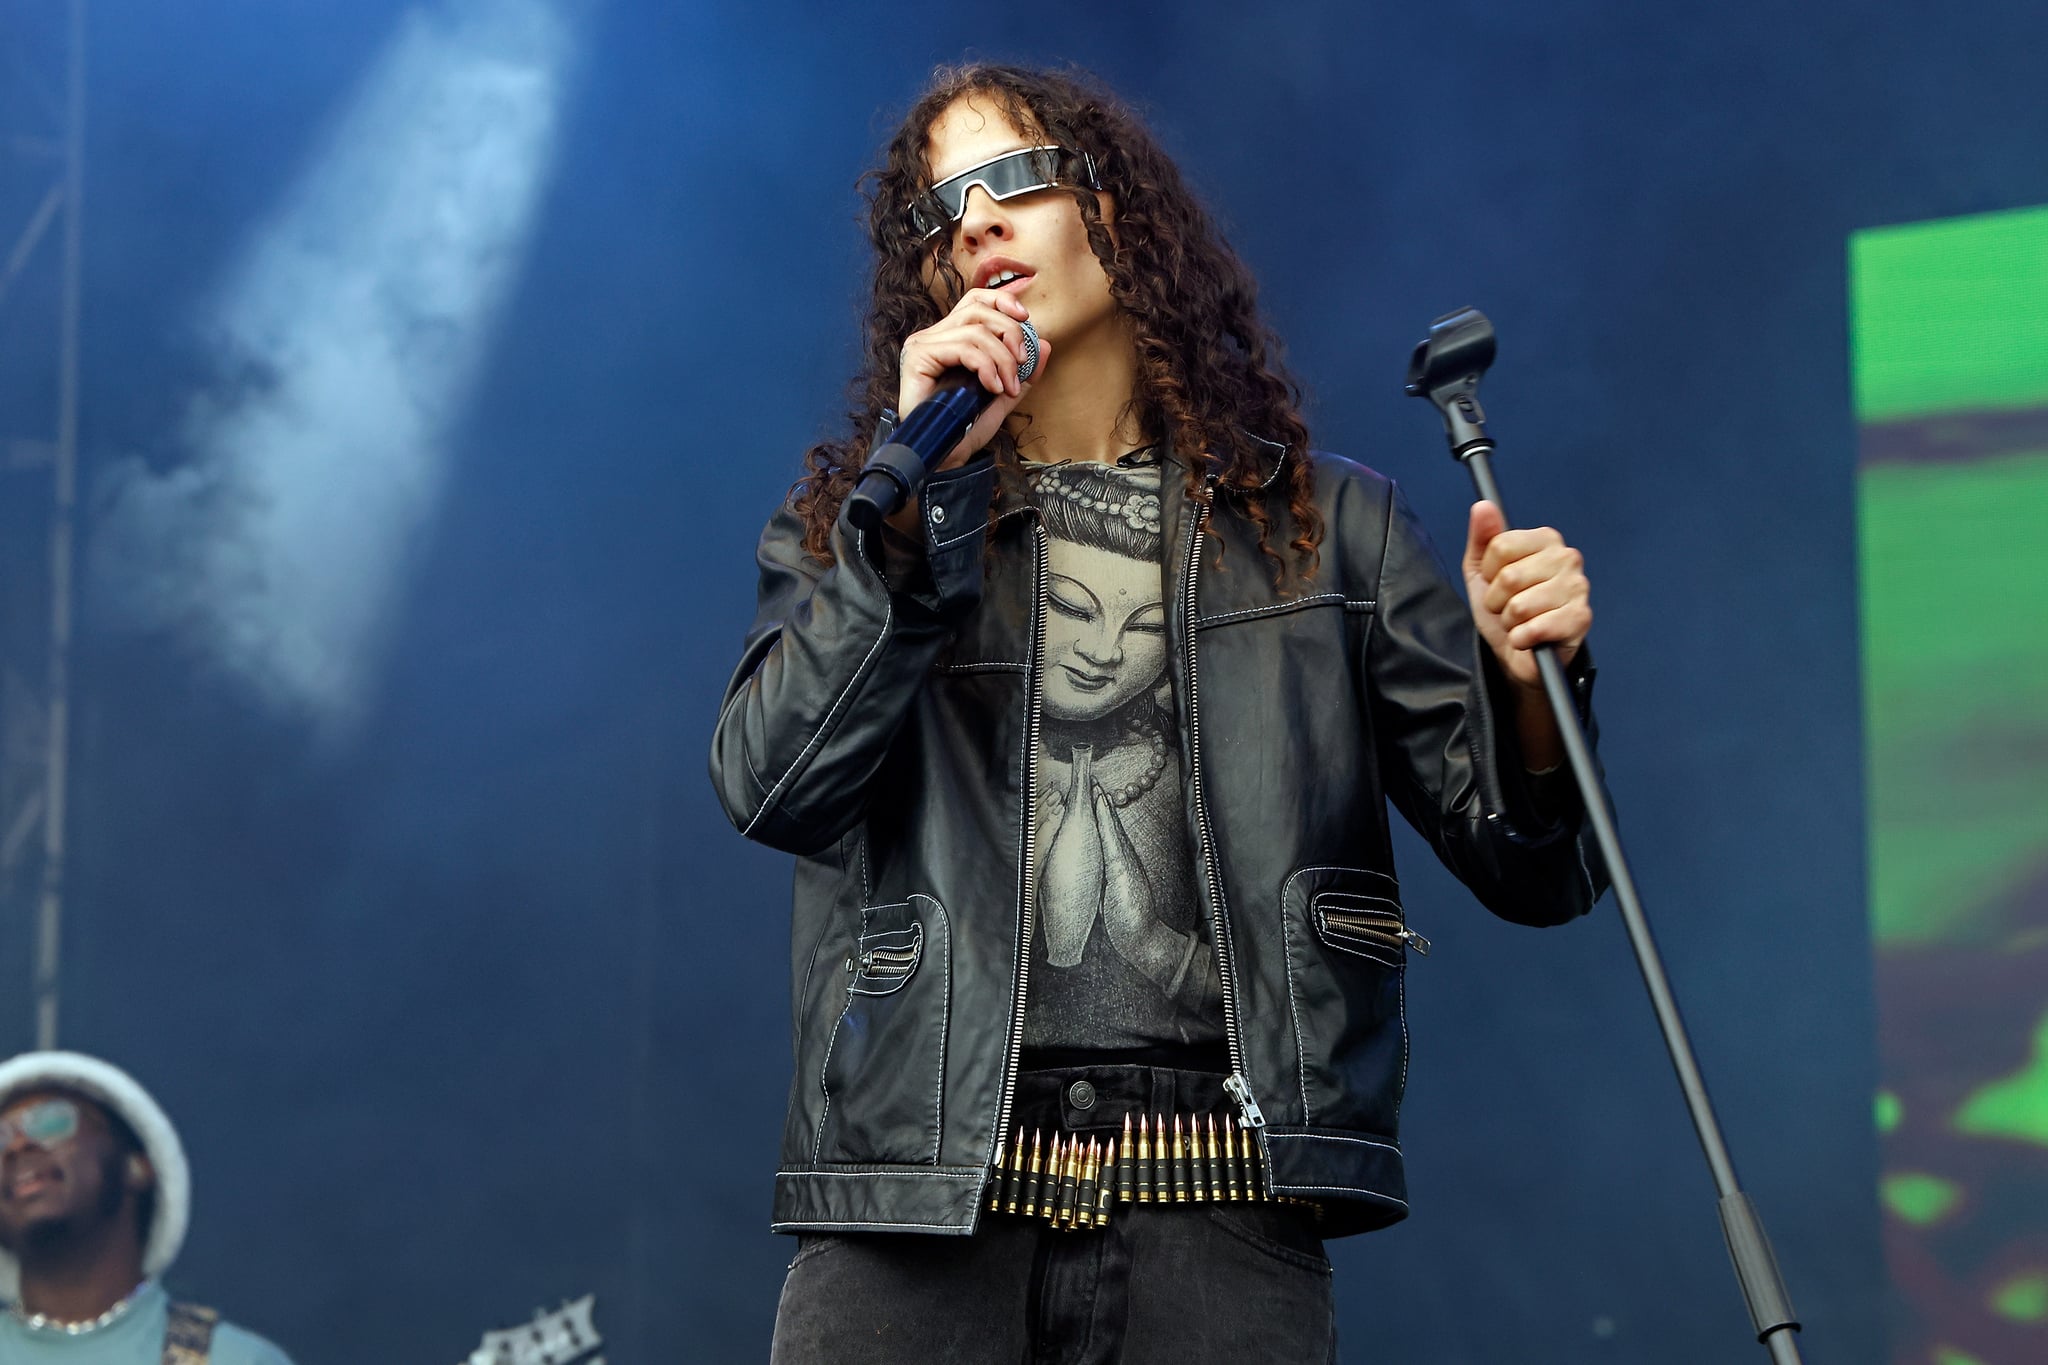 070 Shake at Governors Ball 2023, See the Best Photos From Governors Ball  2023 Featuring Lizzo, Kendrick Lamar, and More